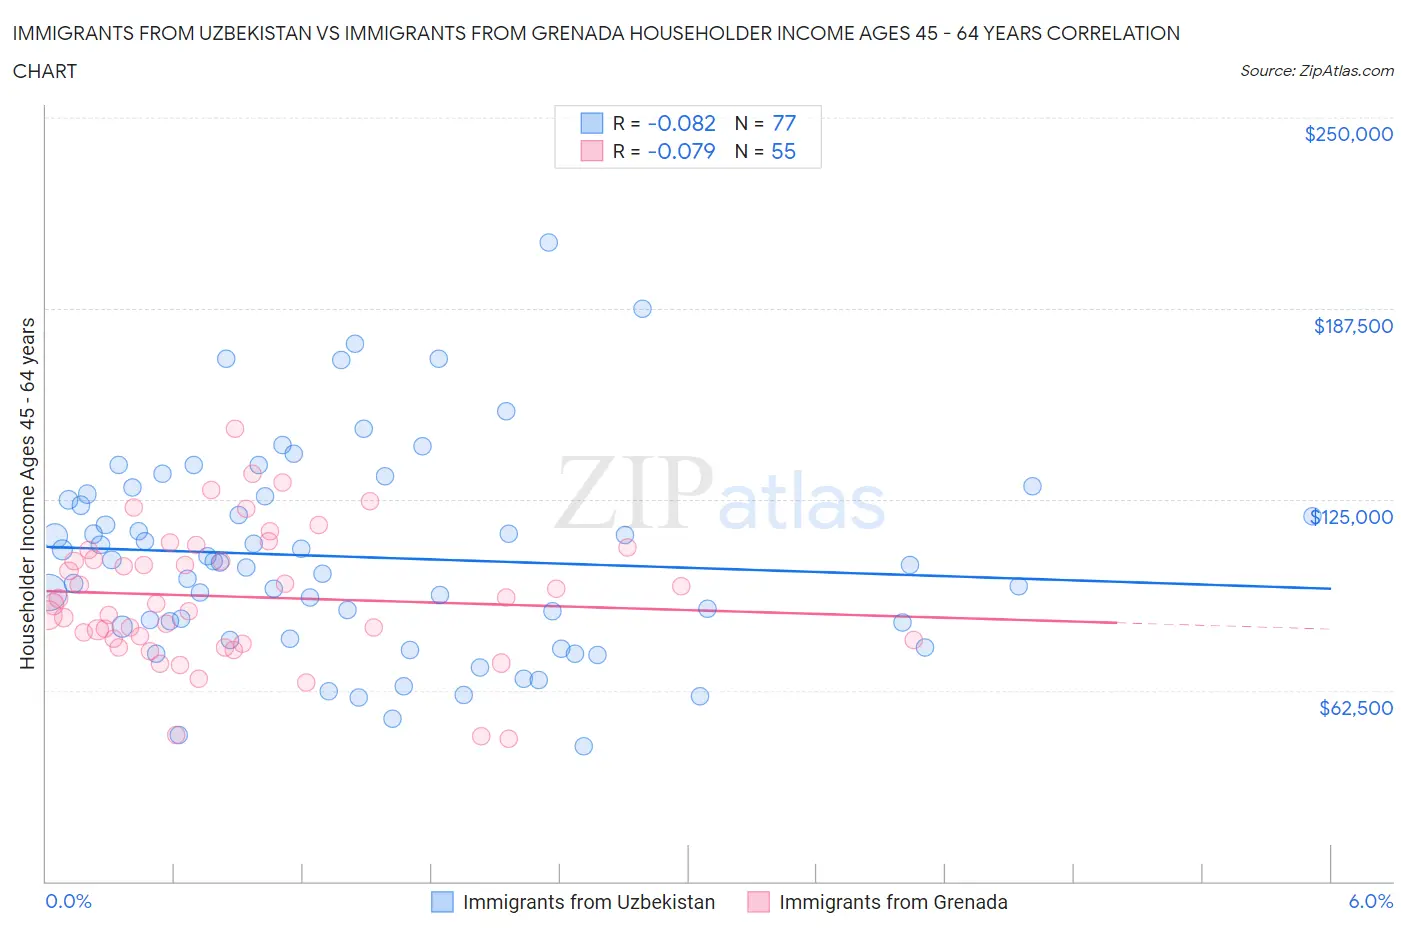 Immigrants from Uzbekistan vs Immigrants from Grenada Householder Income Ages 45 - 64 years